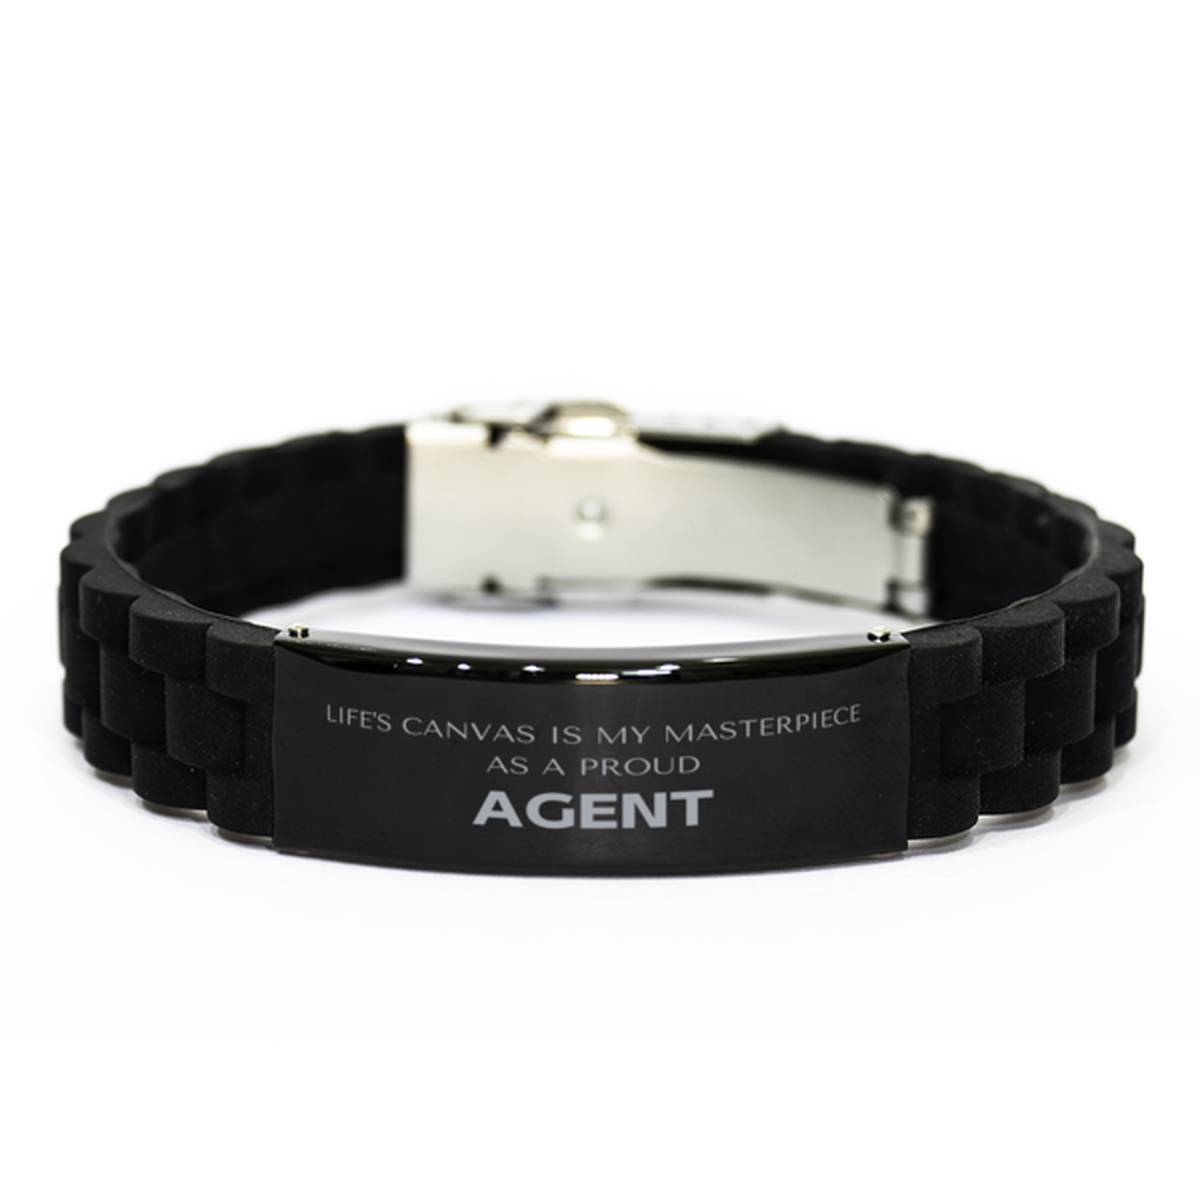 Proud Agent Gifts, Life's canvas is my masterpiece, Epic Birthday Christmas Unique Black Glidelock Clasp Bracelet For Agent, Coworkers, Men, Women, Friends